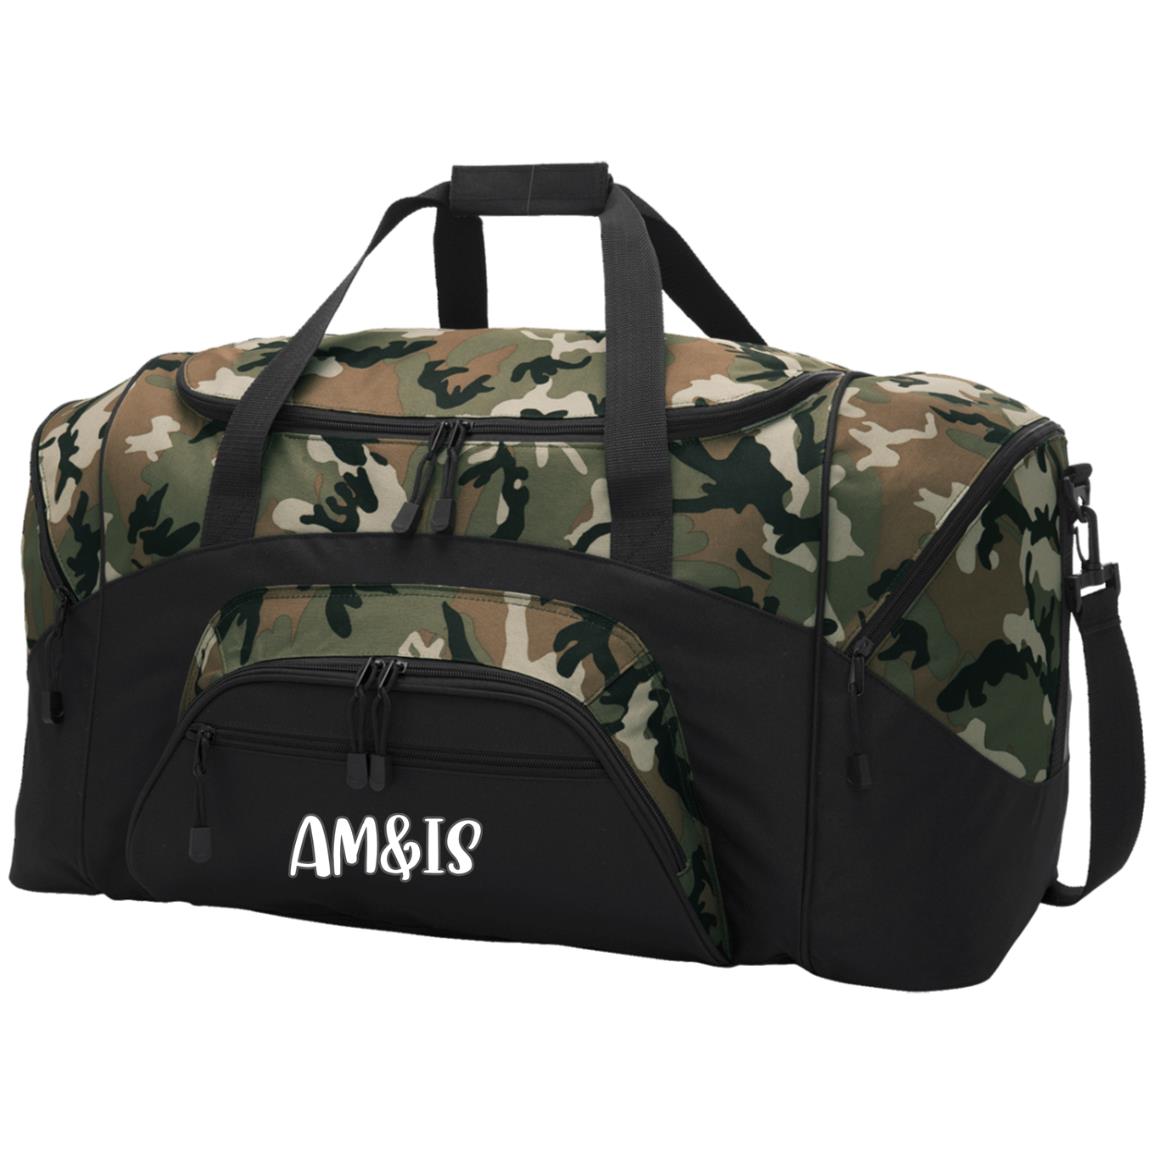 BLACK/CAMOUFLAGE ONE SIZE - AM&IS Activewear Colorblock Sport Duffel - duffel bag at TFC&H Co.